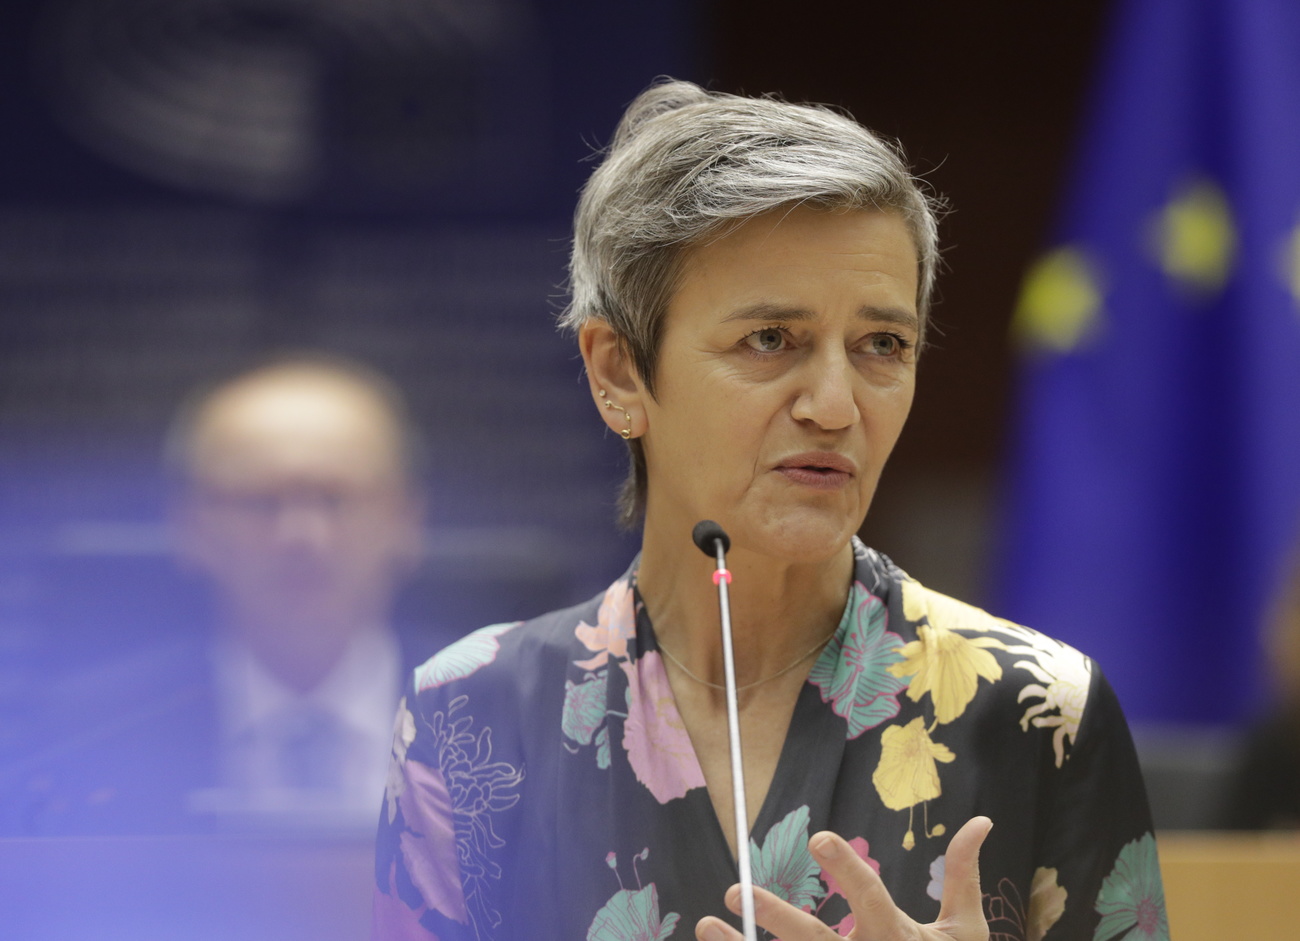 The EU Commissioner for competition policy, Margrethe Vestager.